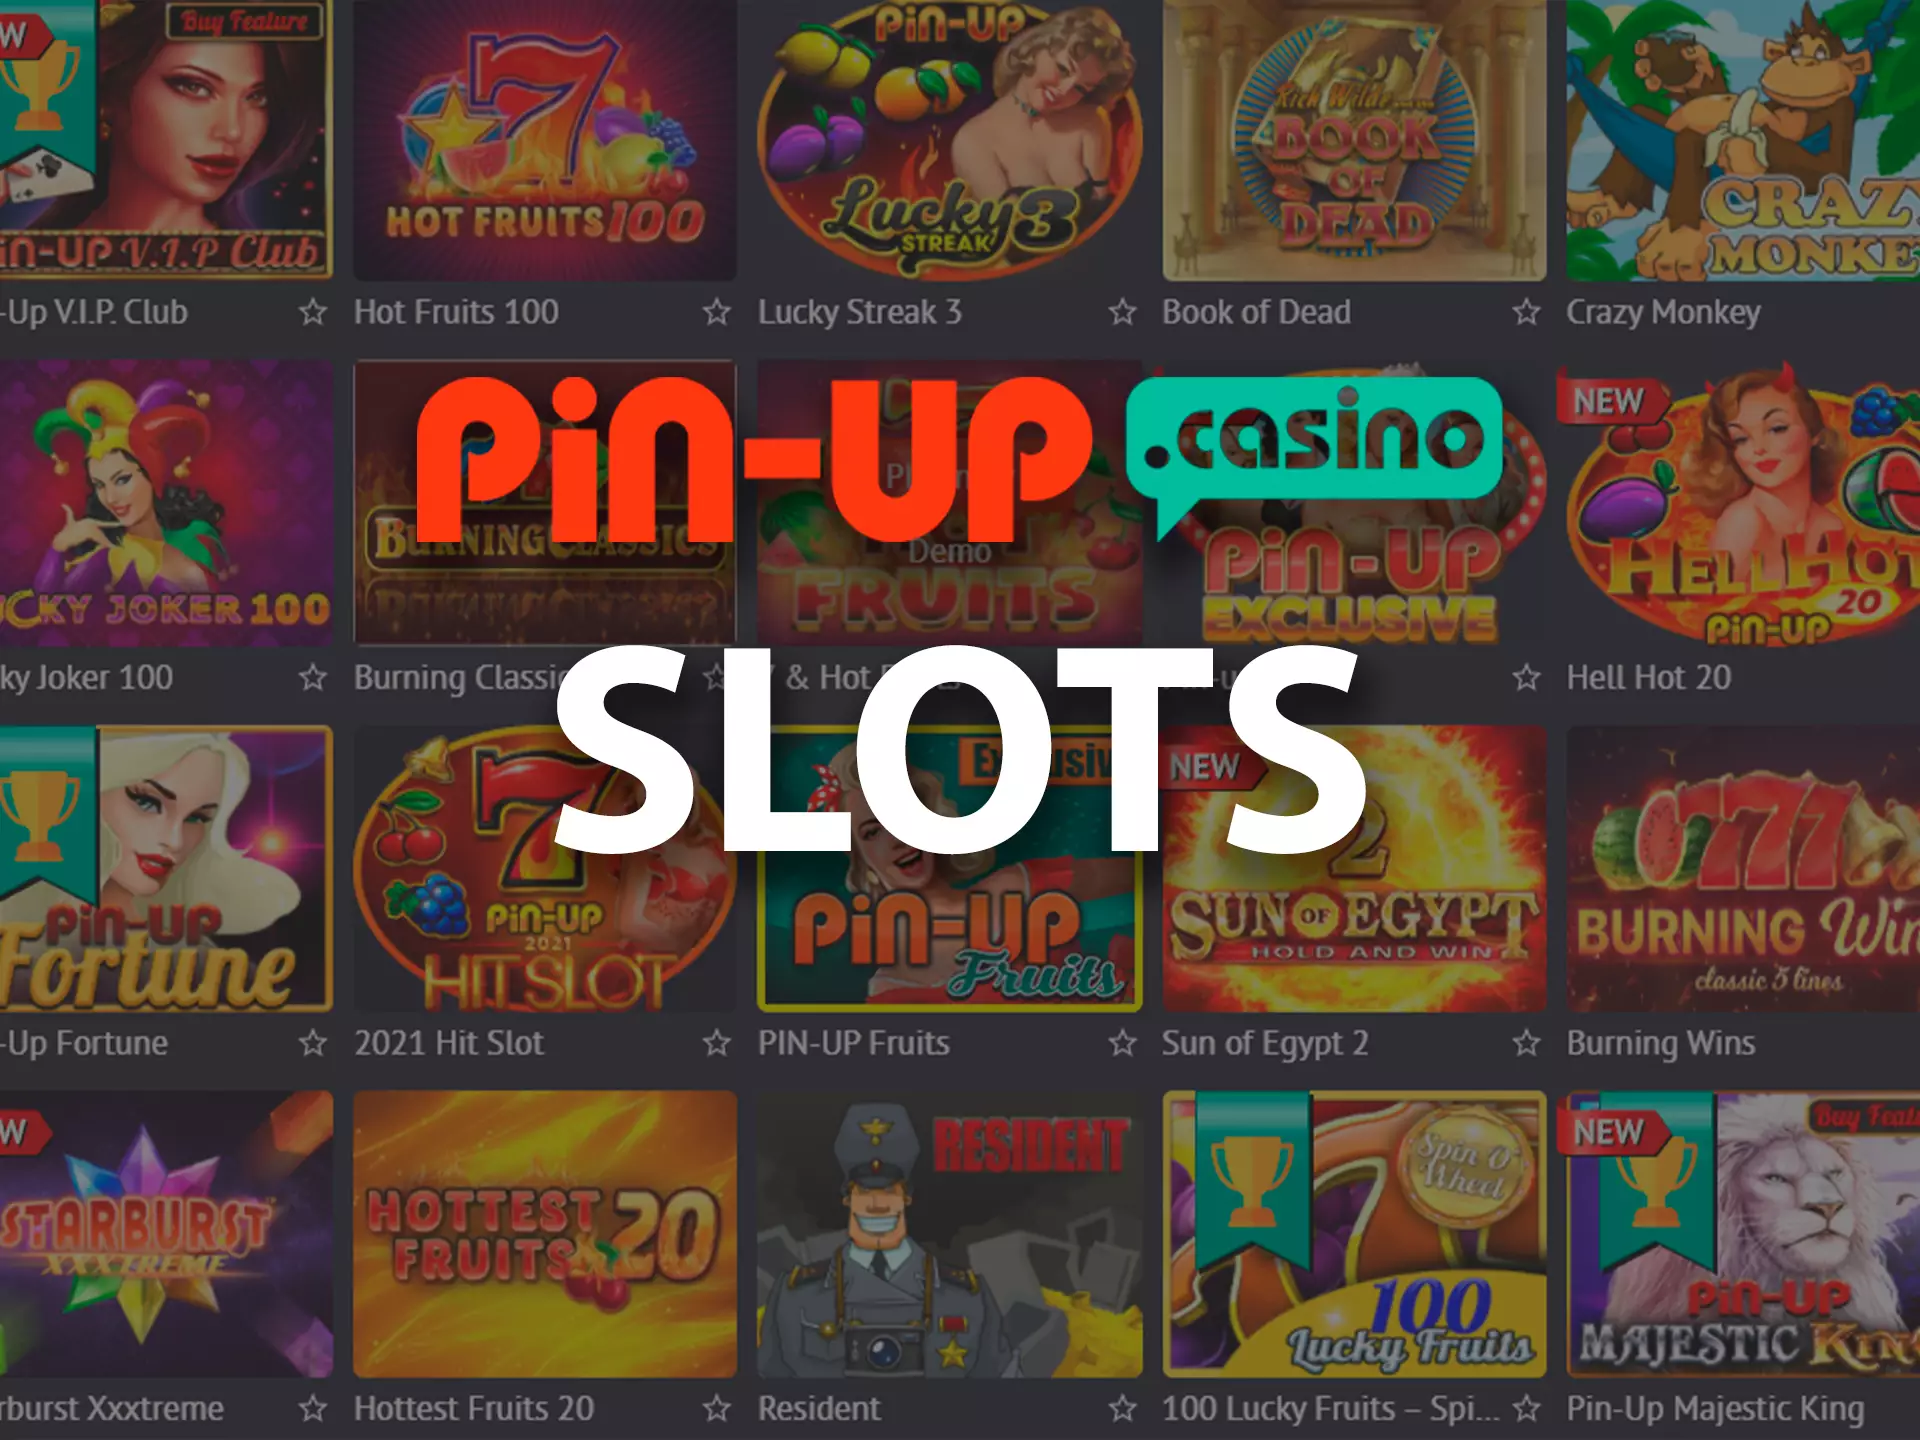 Play your favorite slots in the Pin-Up online casino.